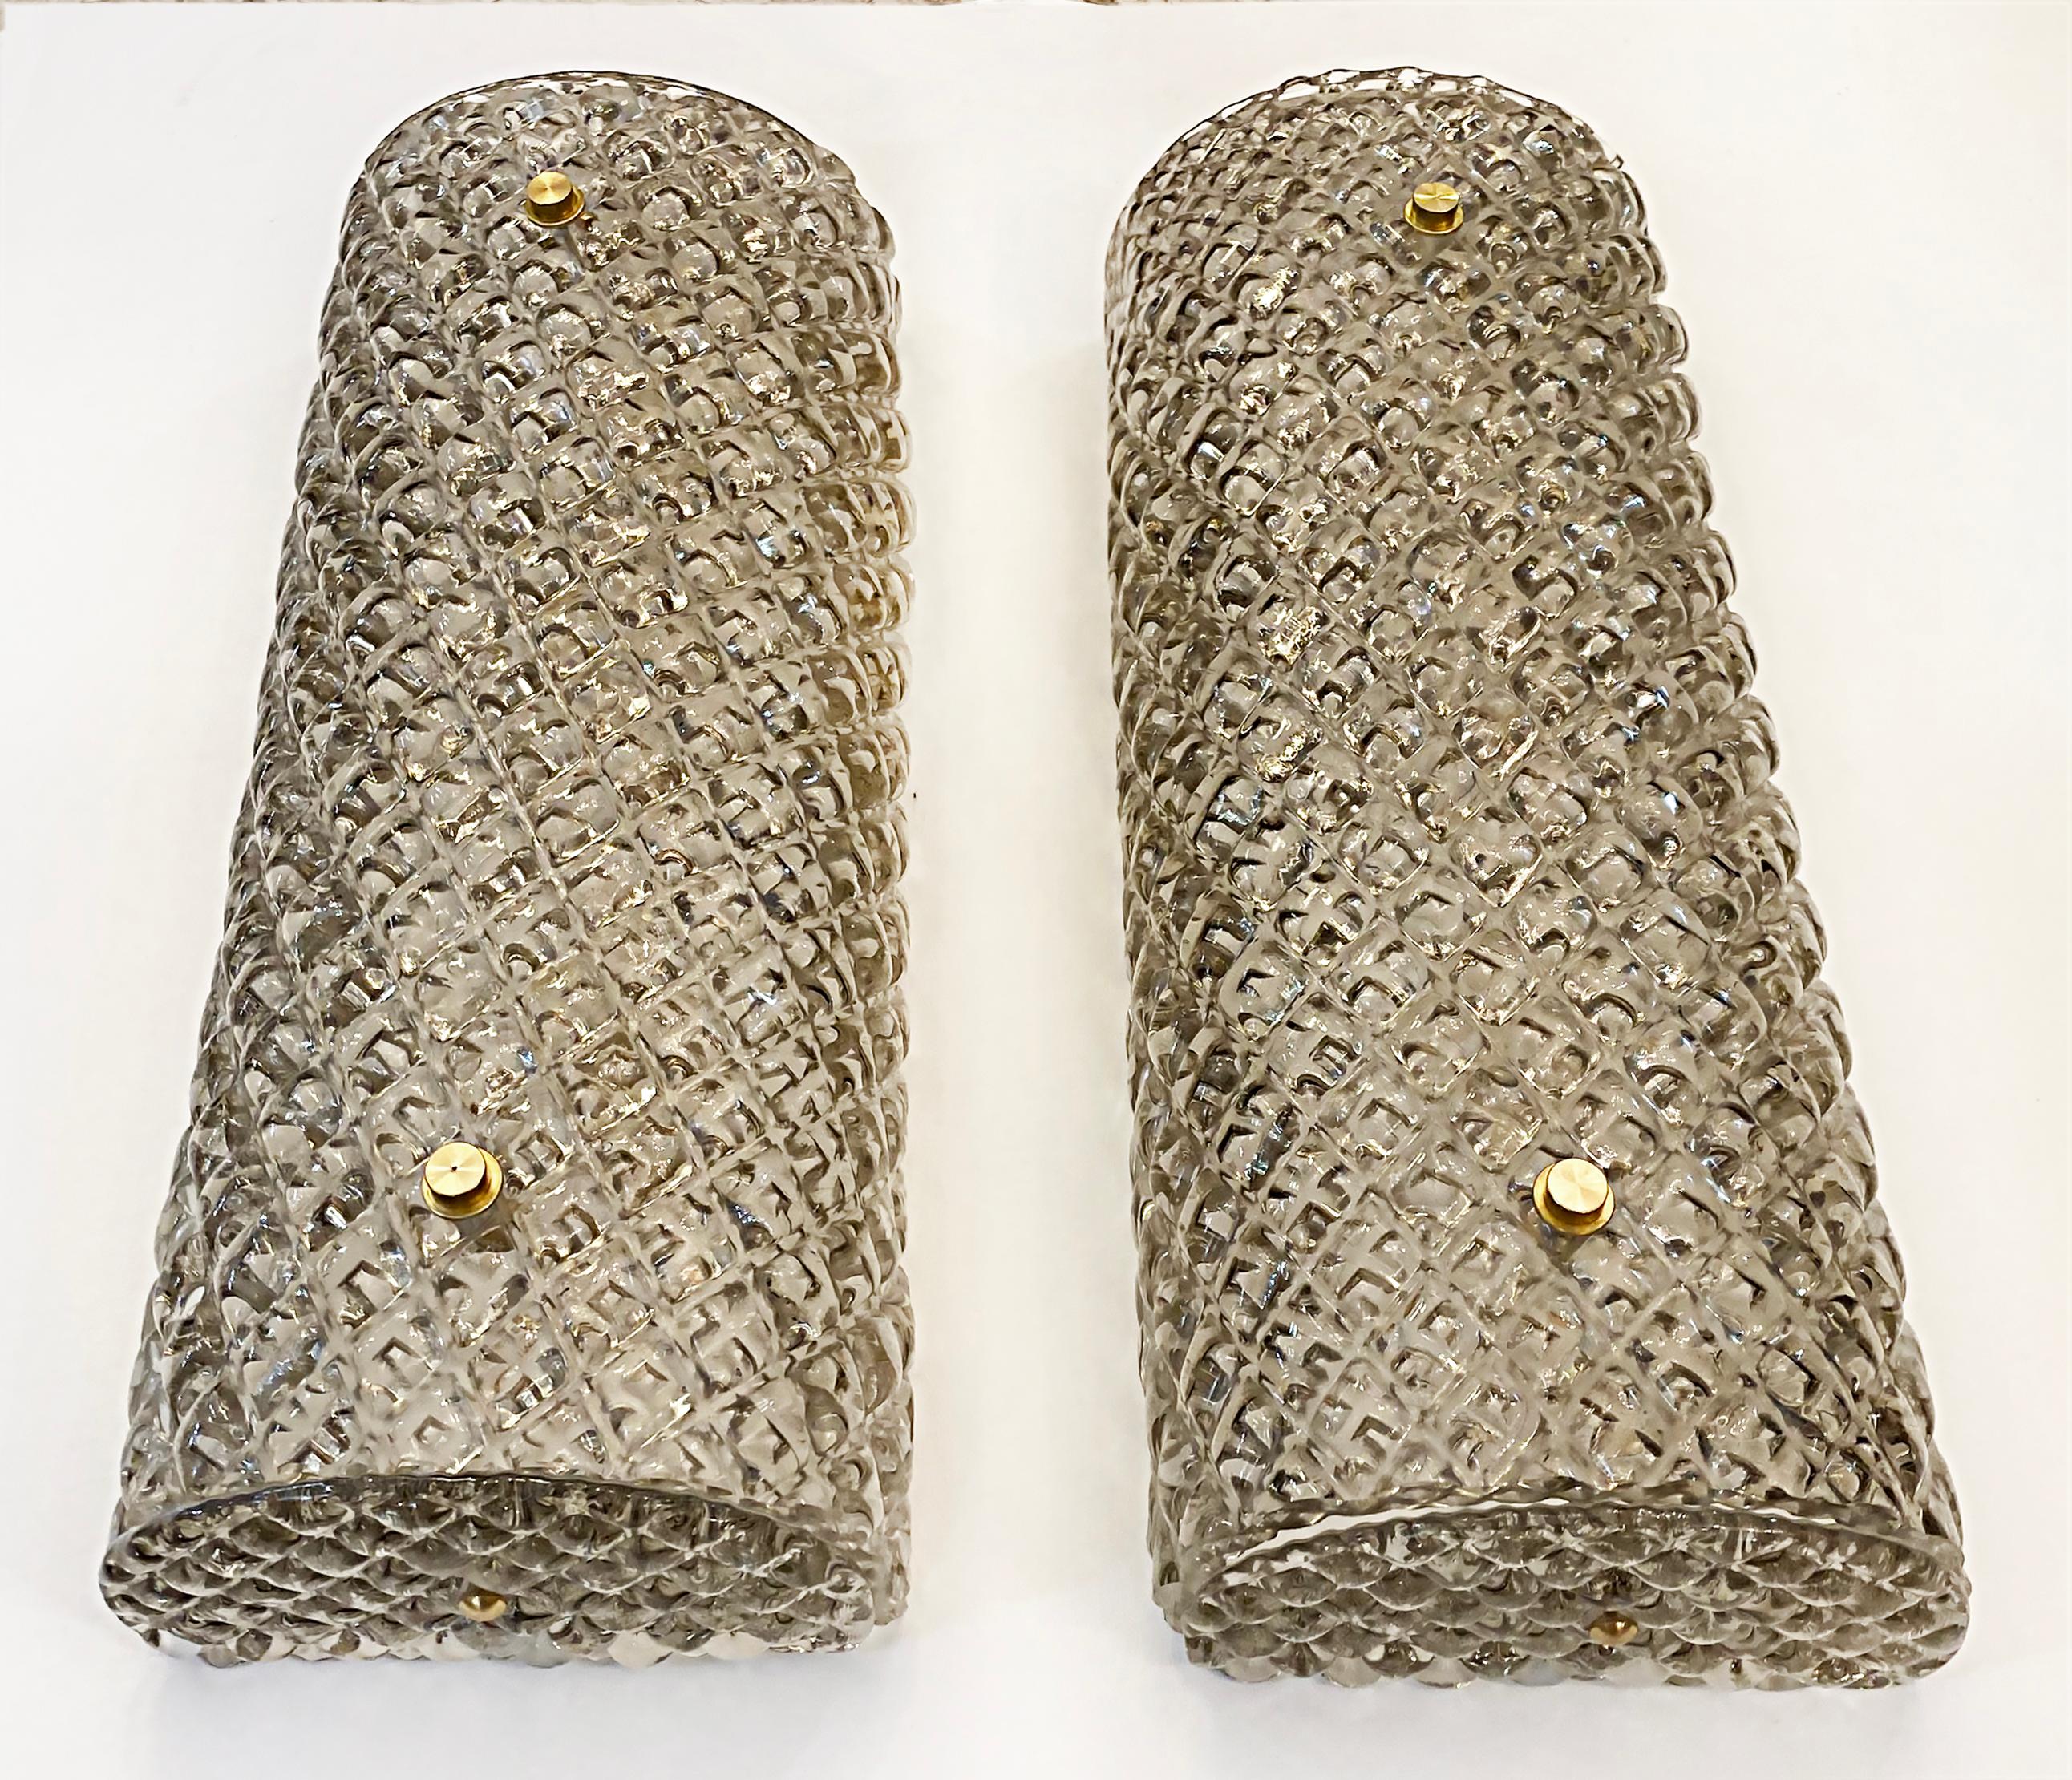 Murano Smoked Textured Glass Wall Sconces, Available Now

Offered for sale is a pair of Murano textured, smoked glass wall sconces which are available for immediate delivery from our shop in Miami. The sconces are in current production and